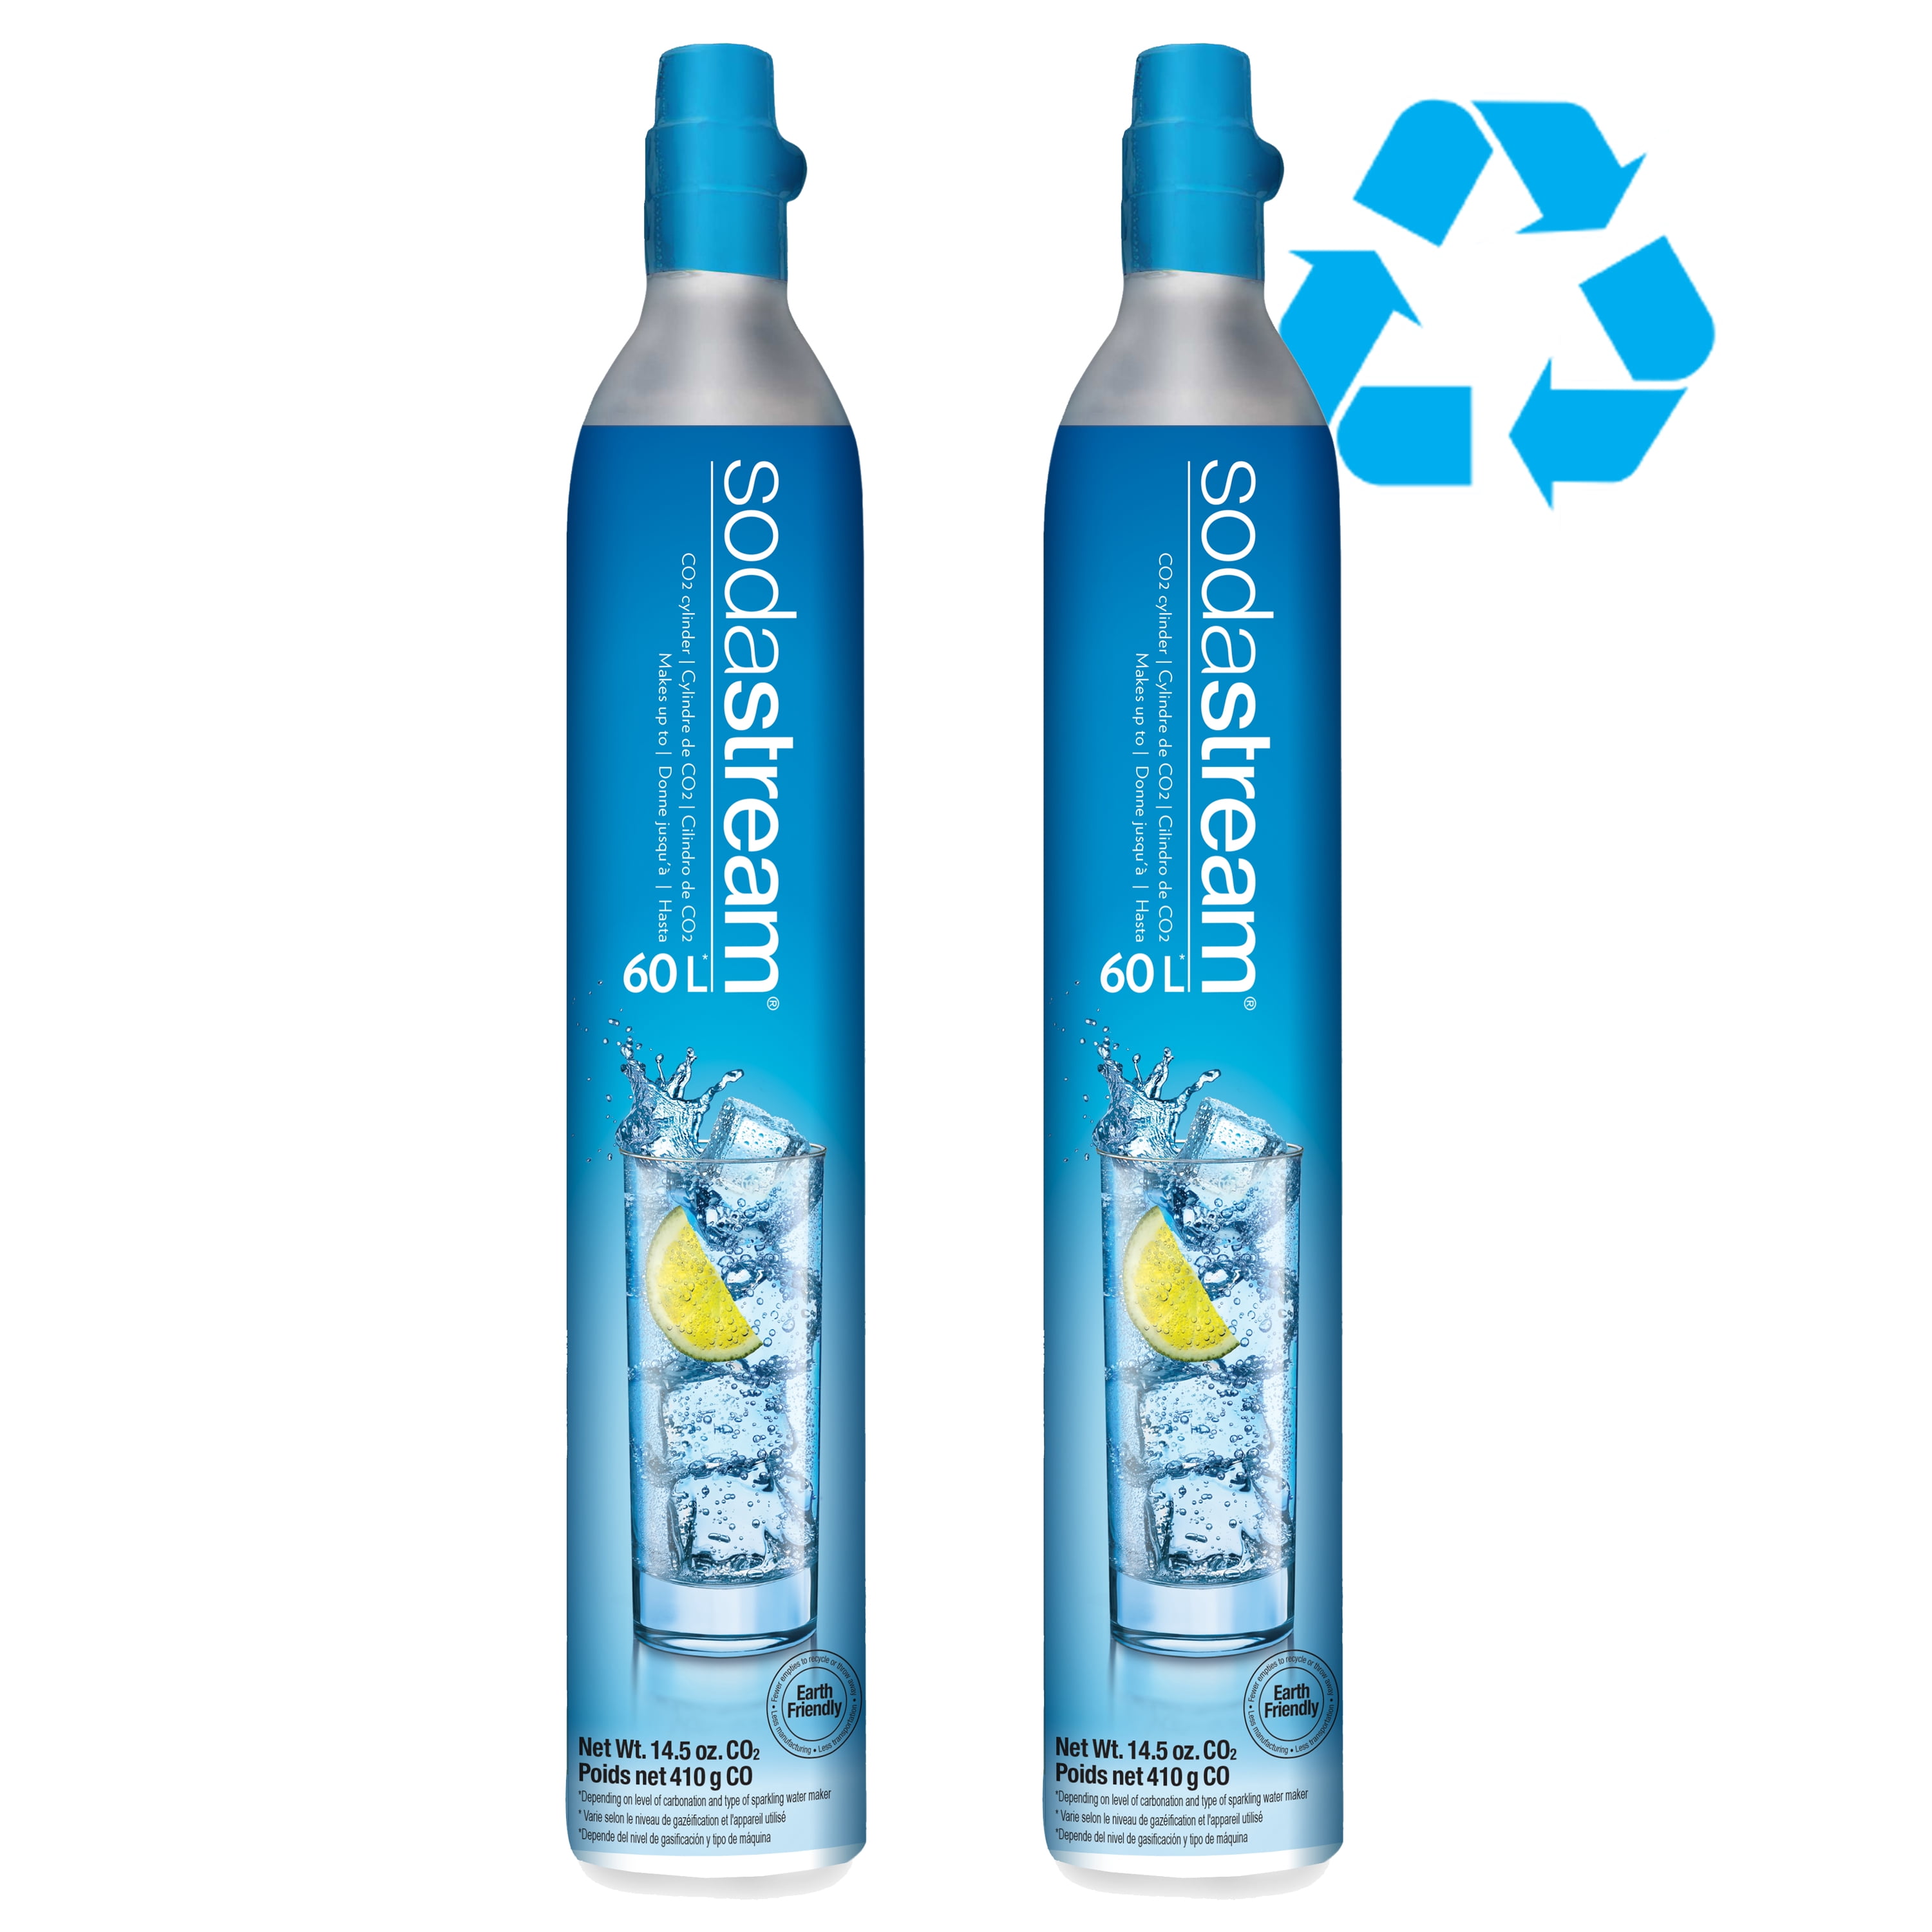 14.5oz Set of 2 PASONG 60L Co2 Carbonator Compatible with Sodastream Appliances 